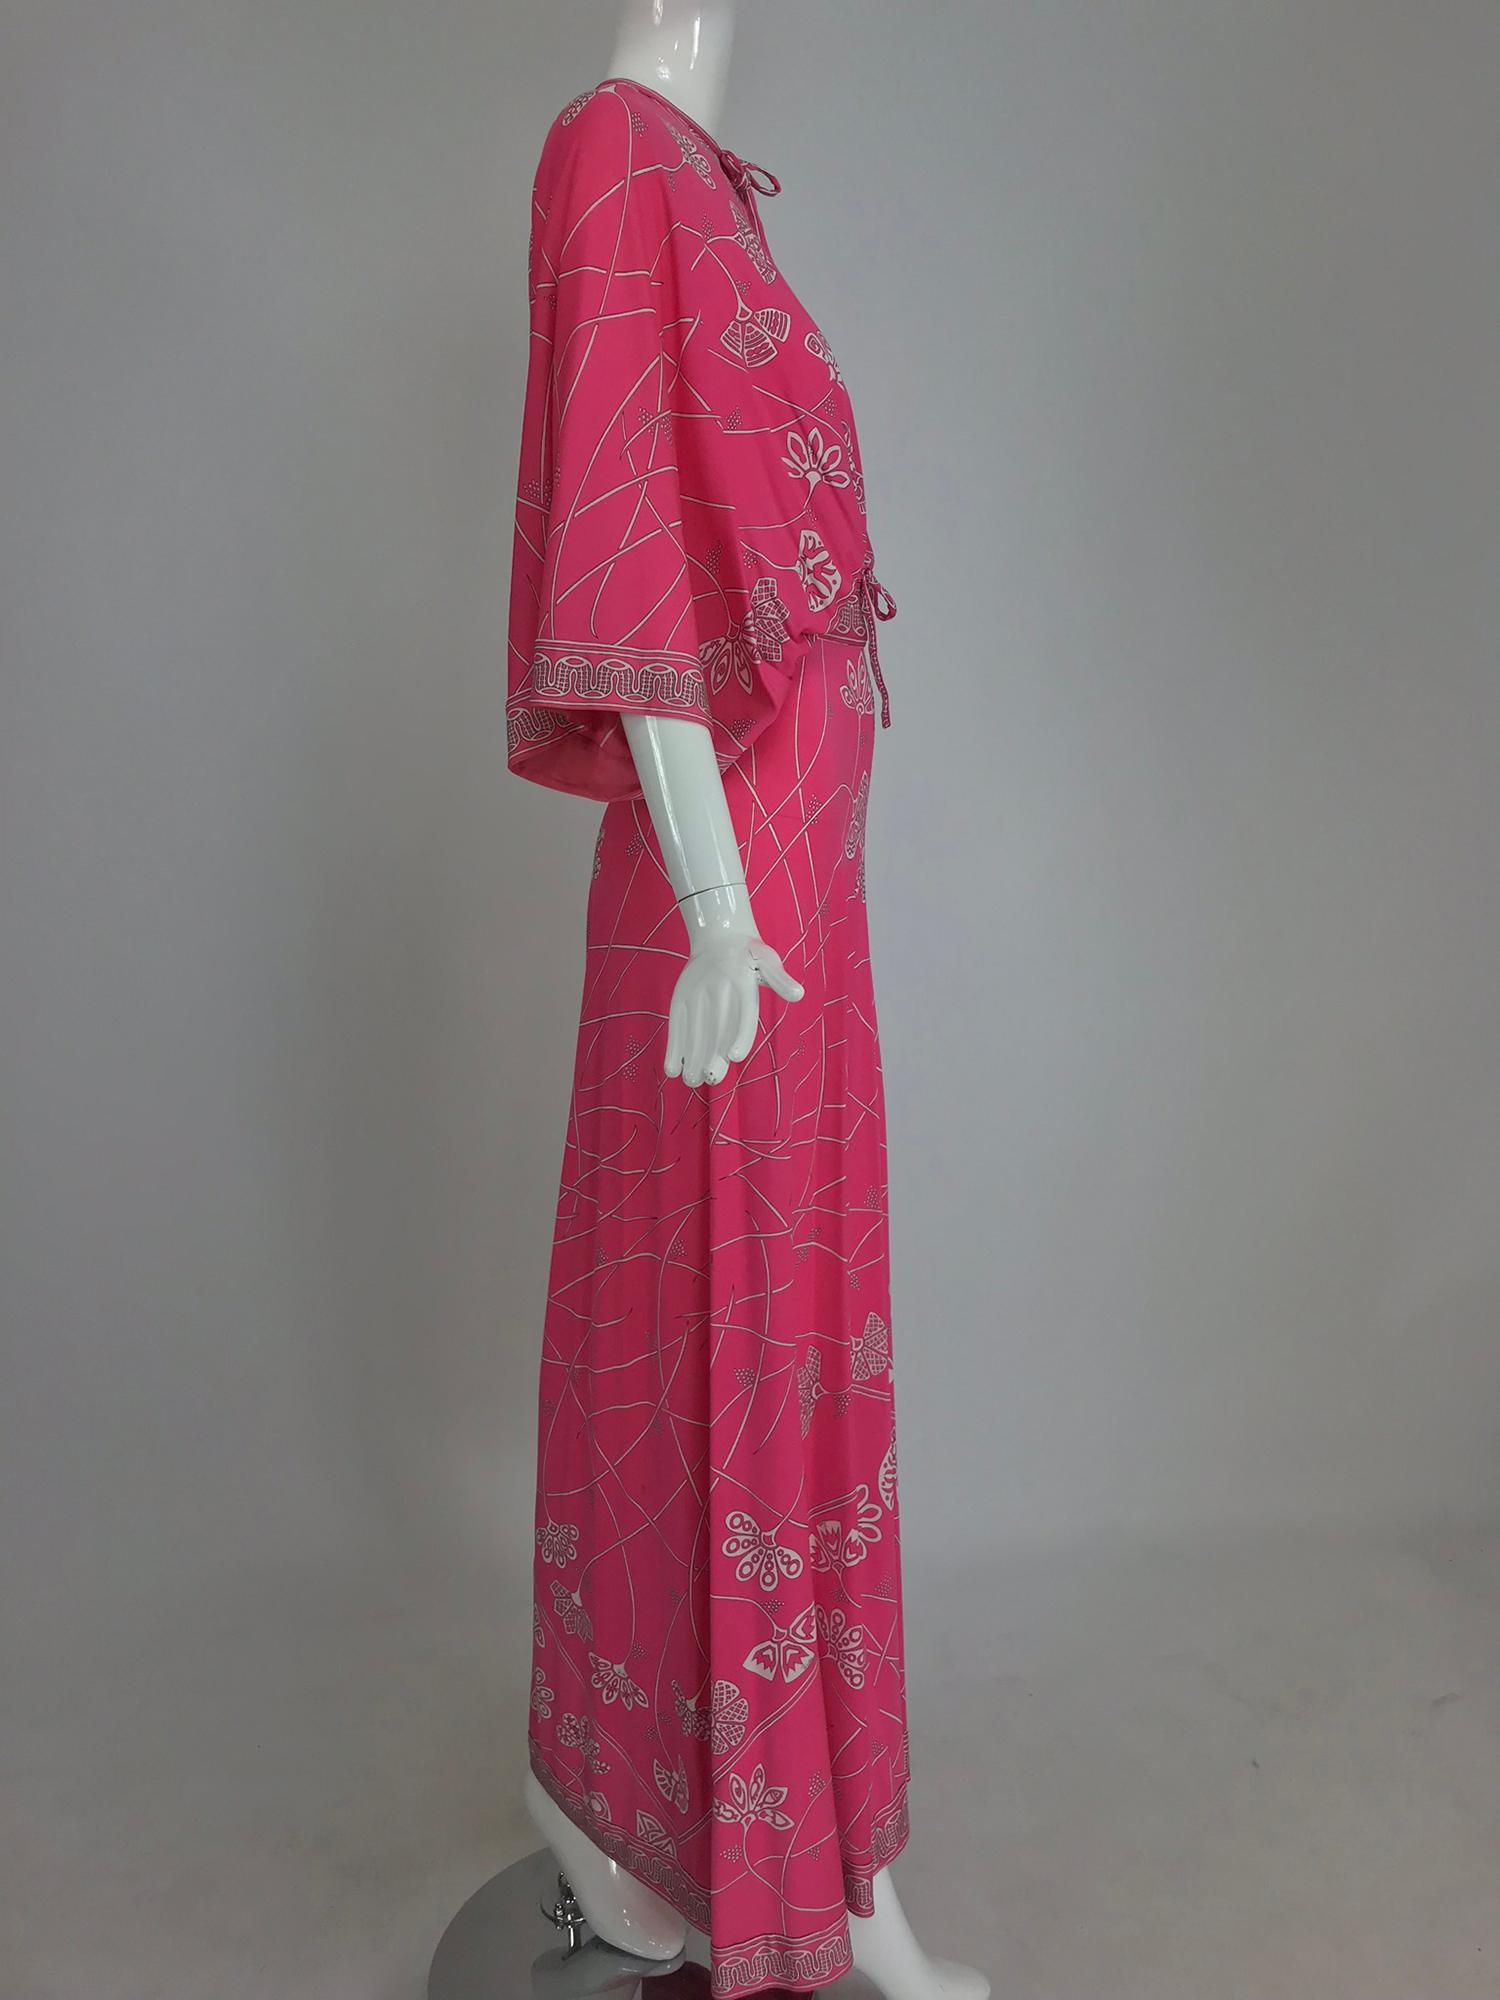 Emilio Pucci silk jersey plunge top and palazzo trousers, 1970s 5